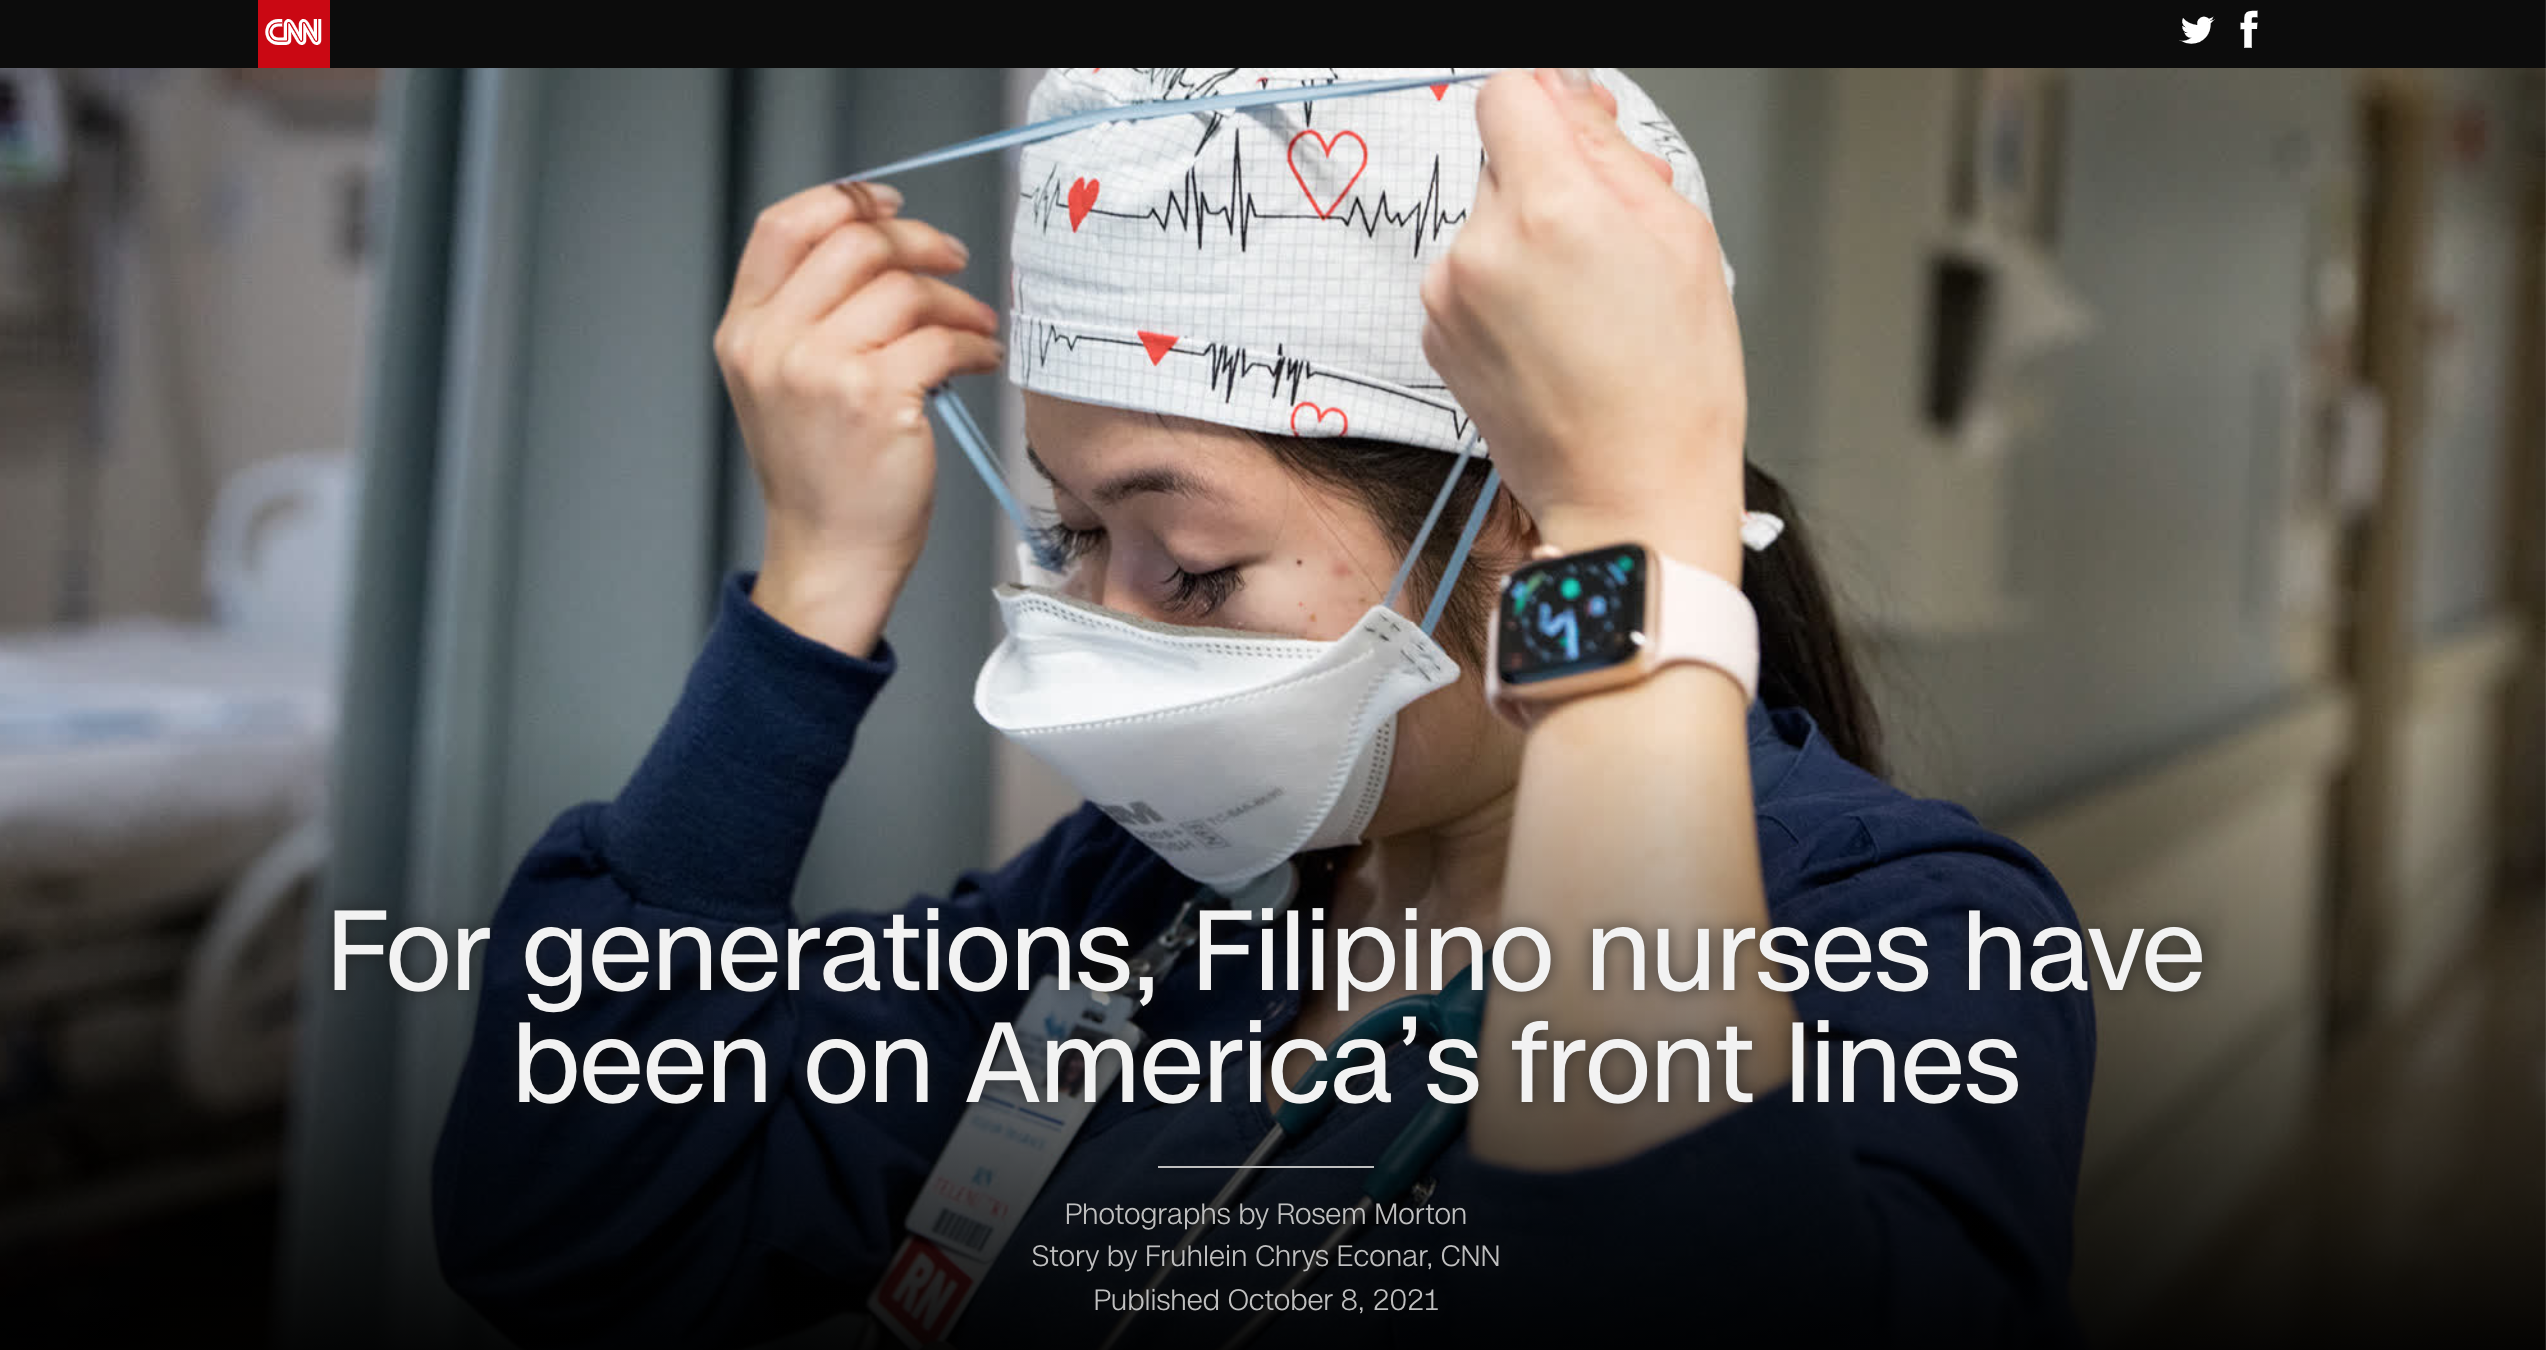 Thumbnail of CNN: For generations, Filipino nurses have been on America’s front lines